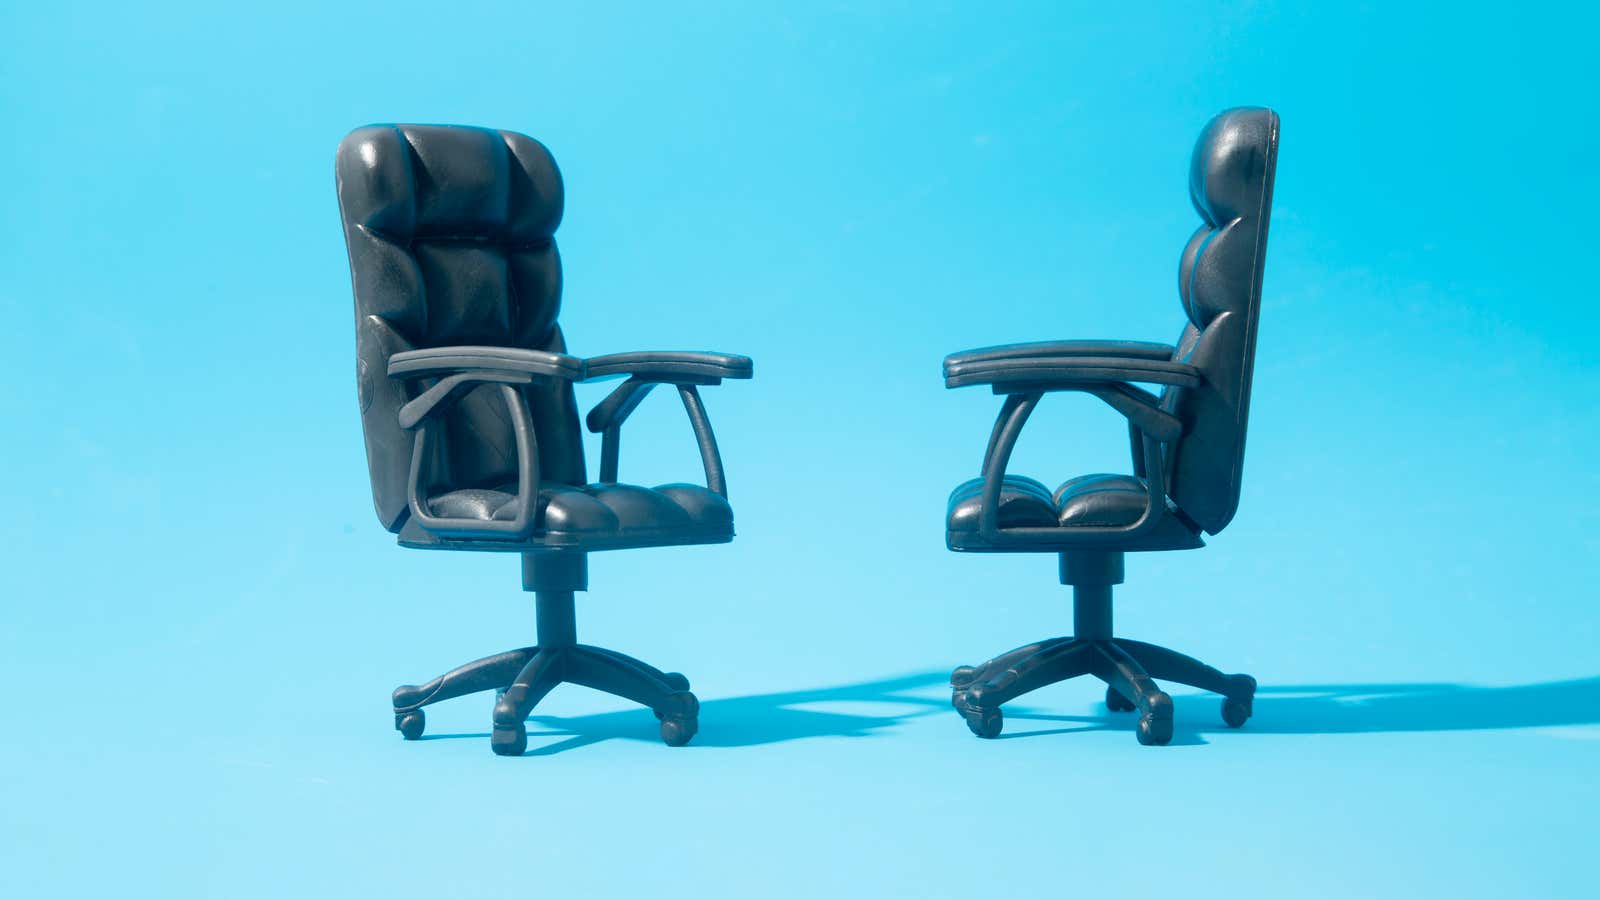 Office chairs: Engineered for extreme sitting